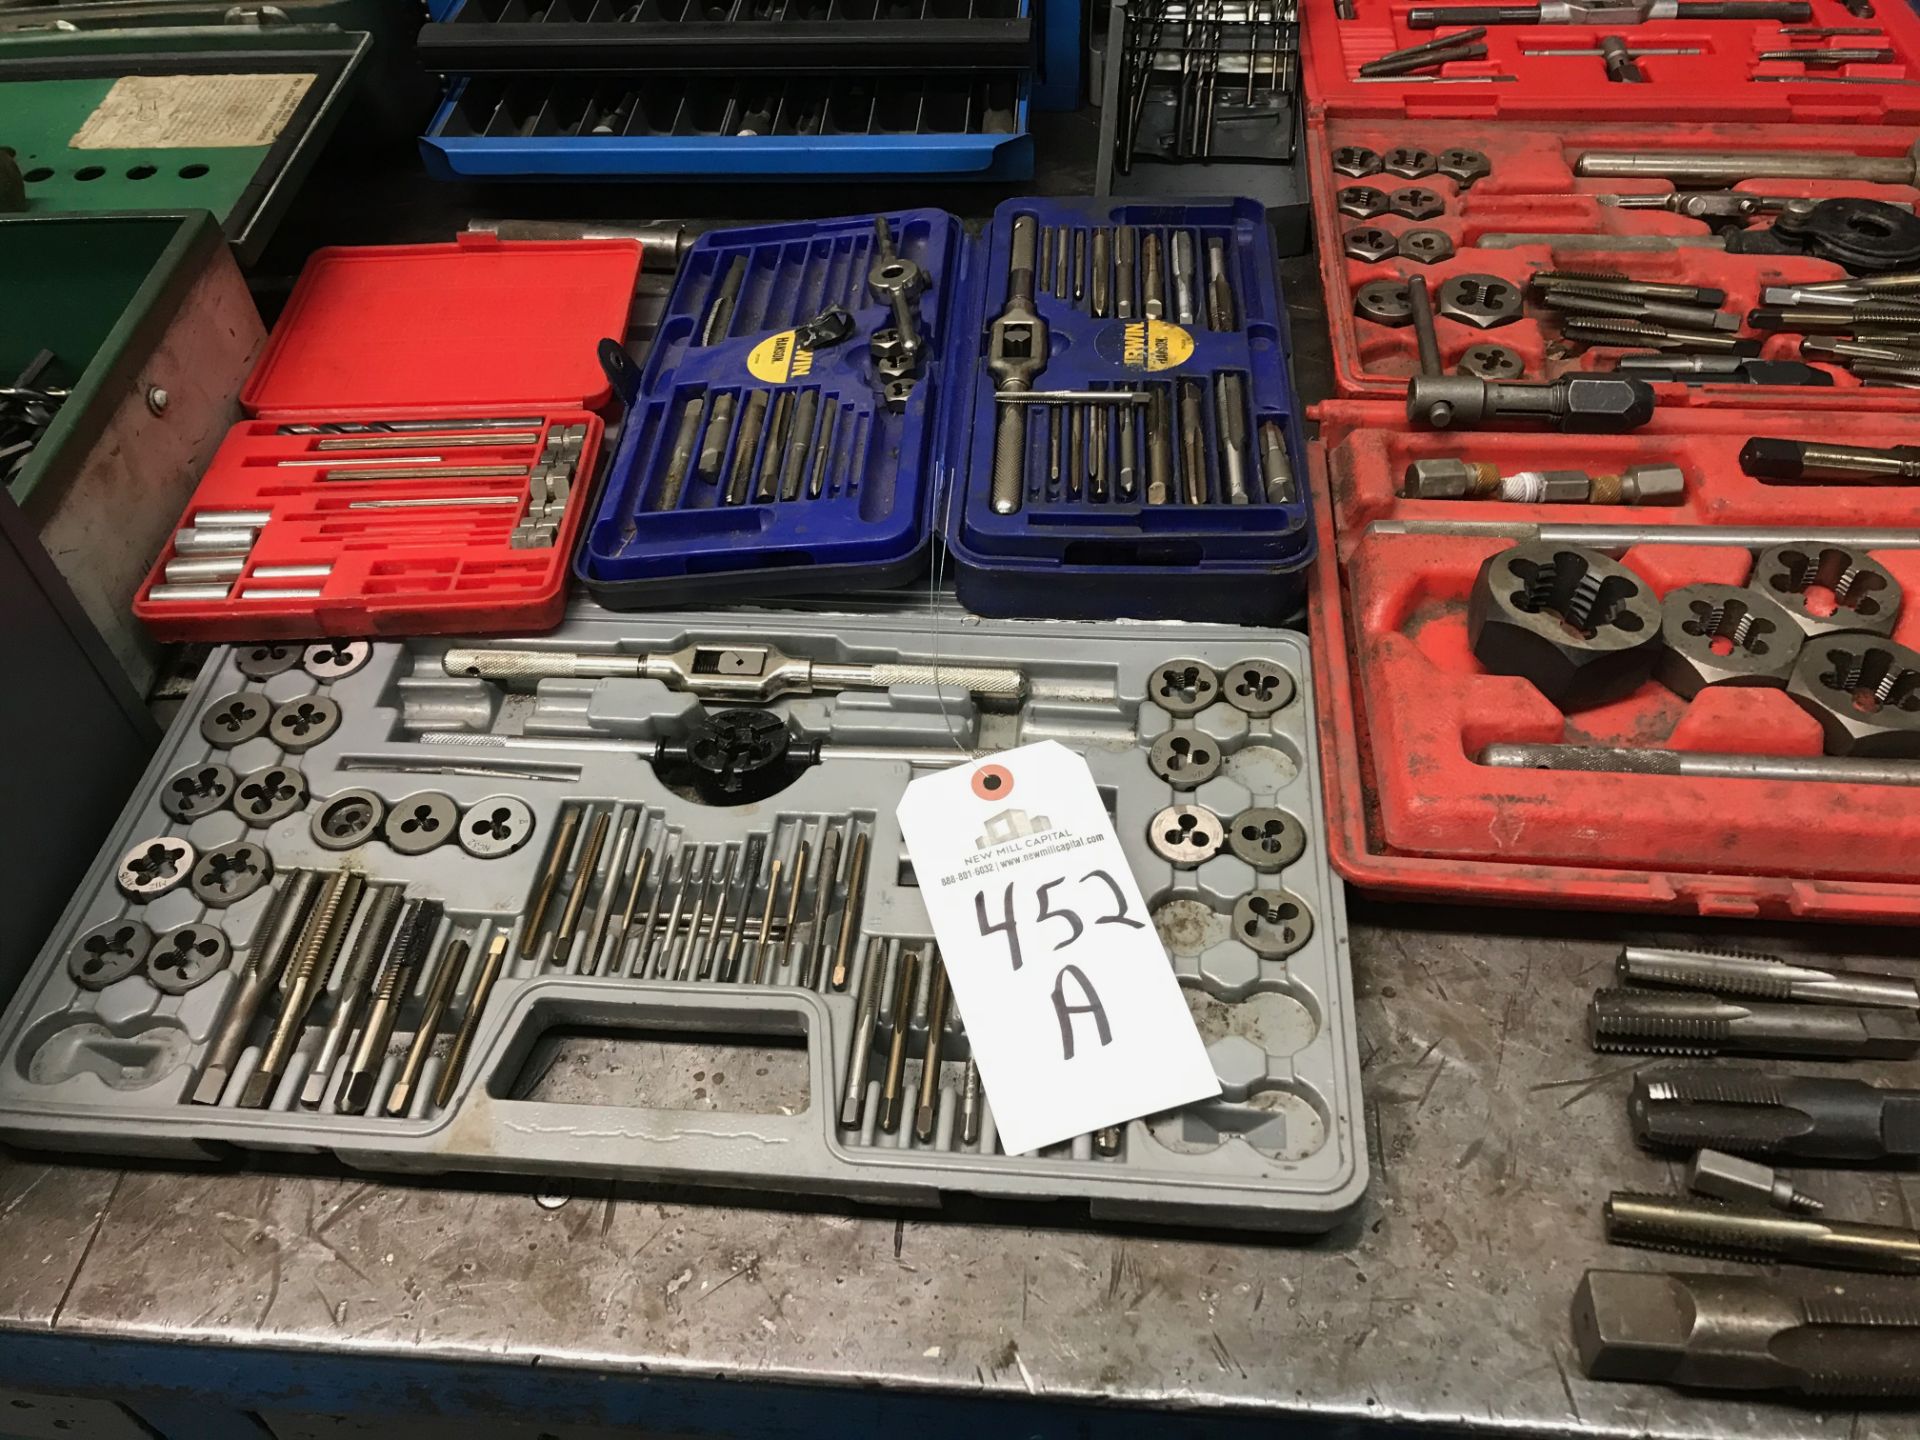 TAP AND DIE SETS, DRILL BITS, PIPE CUTTING GUIDES | Rig Fee: $10